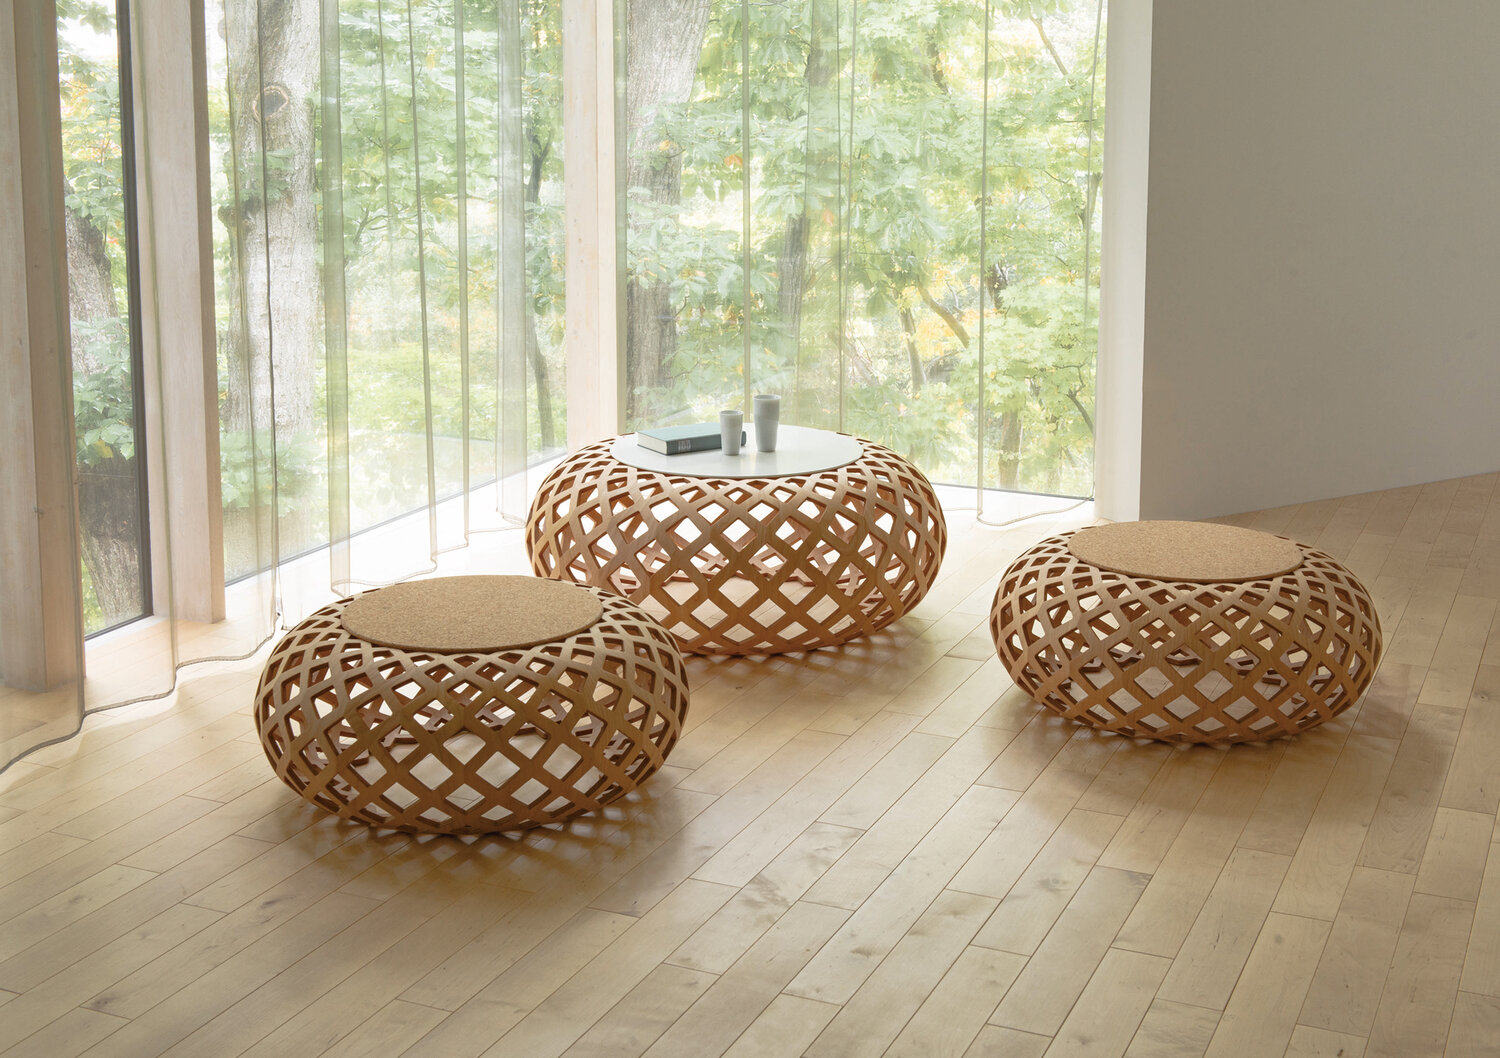 Three round cocktail tables with the appearance of woven bases and cork tops.